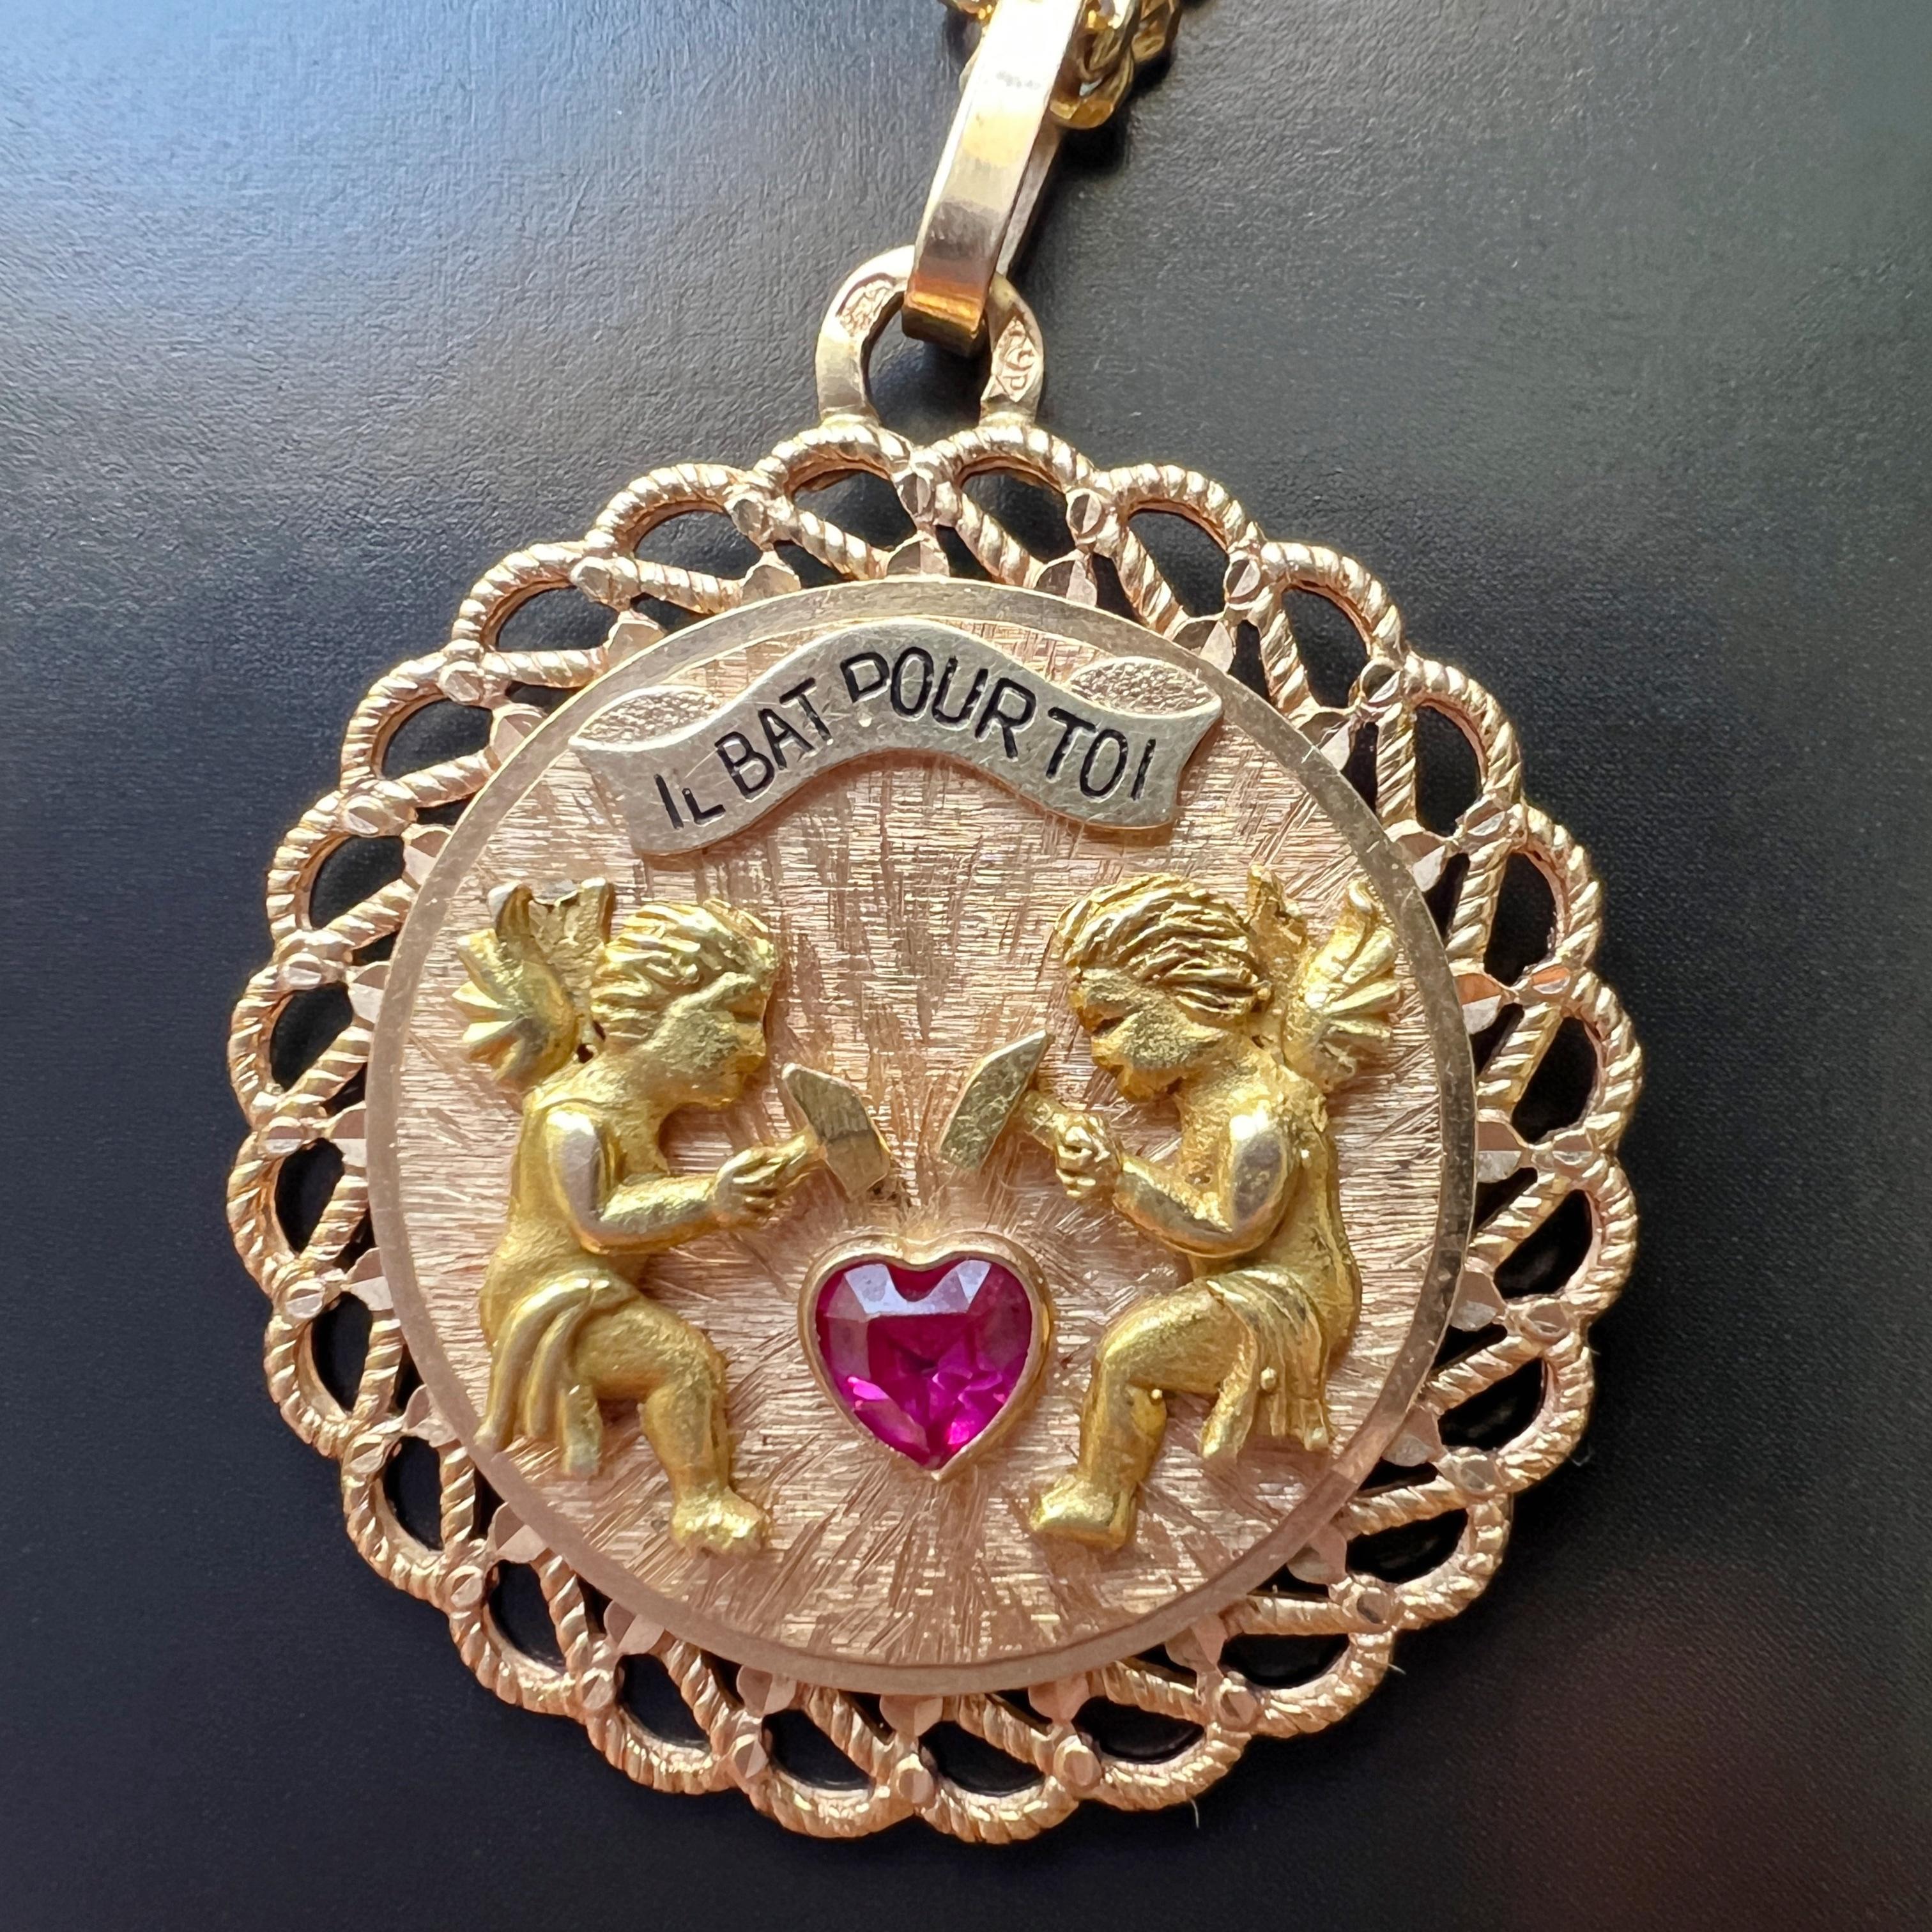 For sale a rare large vintage 18K gold pendant, expressing love and devotion captured in a circle shaped medal. The pendant is a French work and it features two winged angels, each delicately wielding a hammer, symbolizing the gentle beating of a